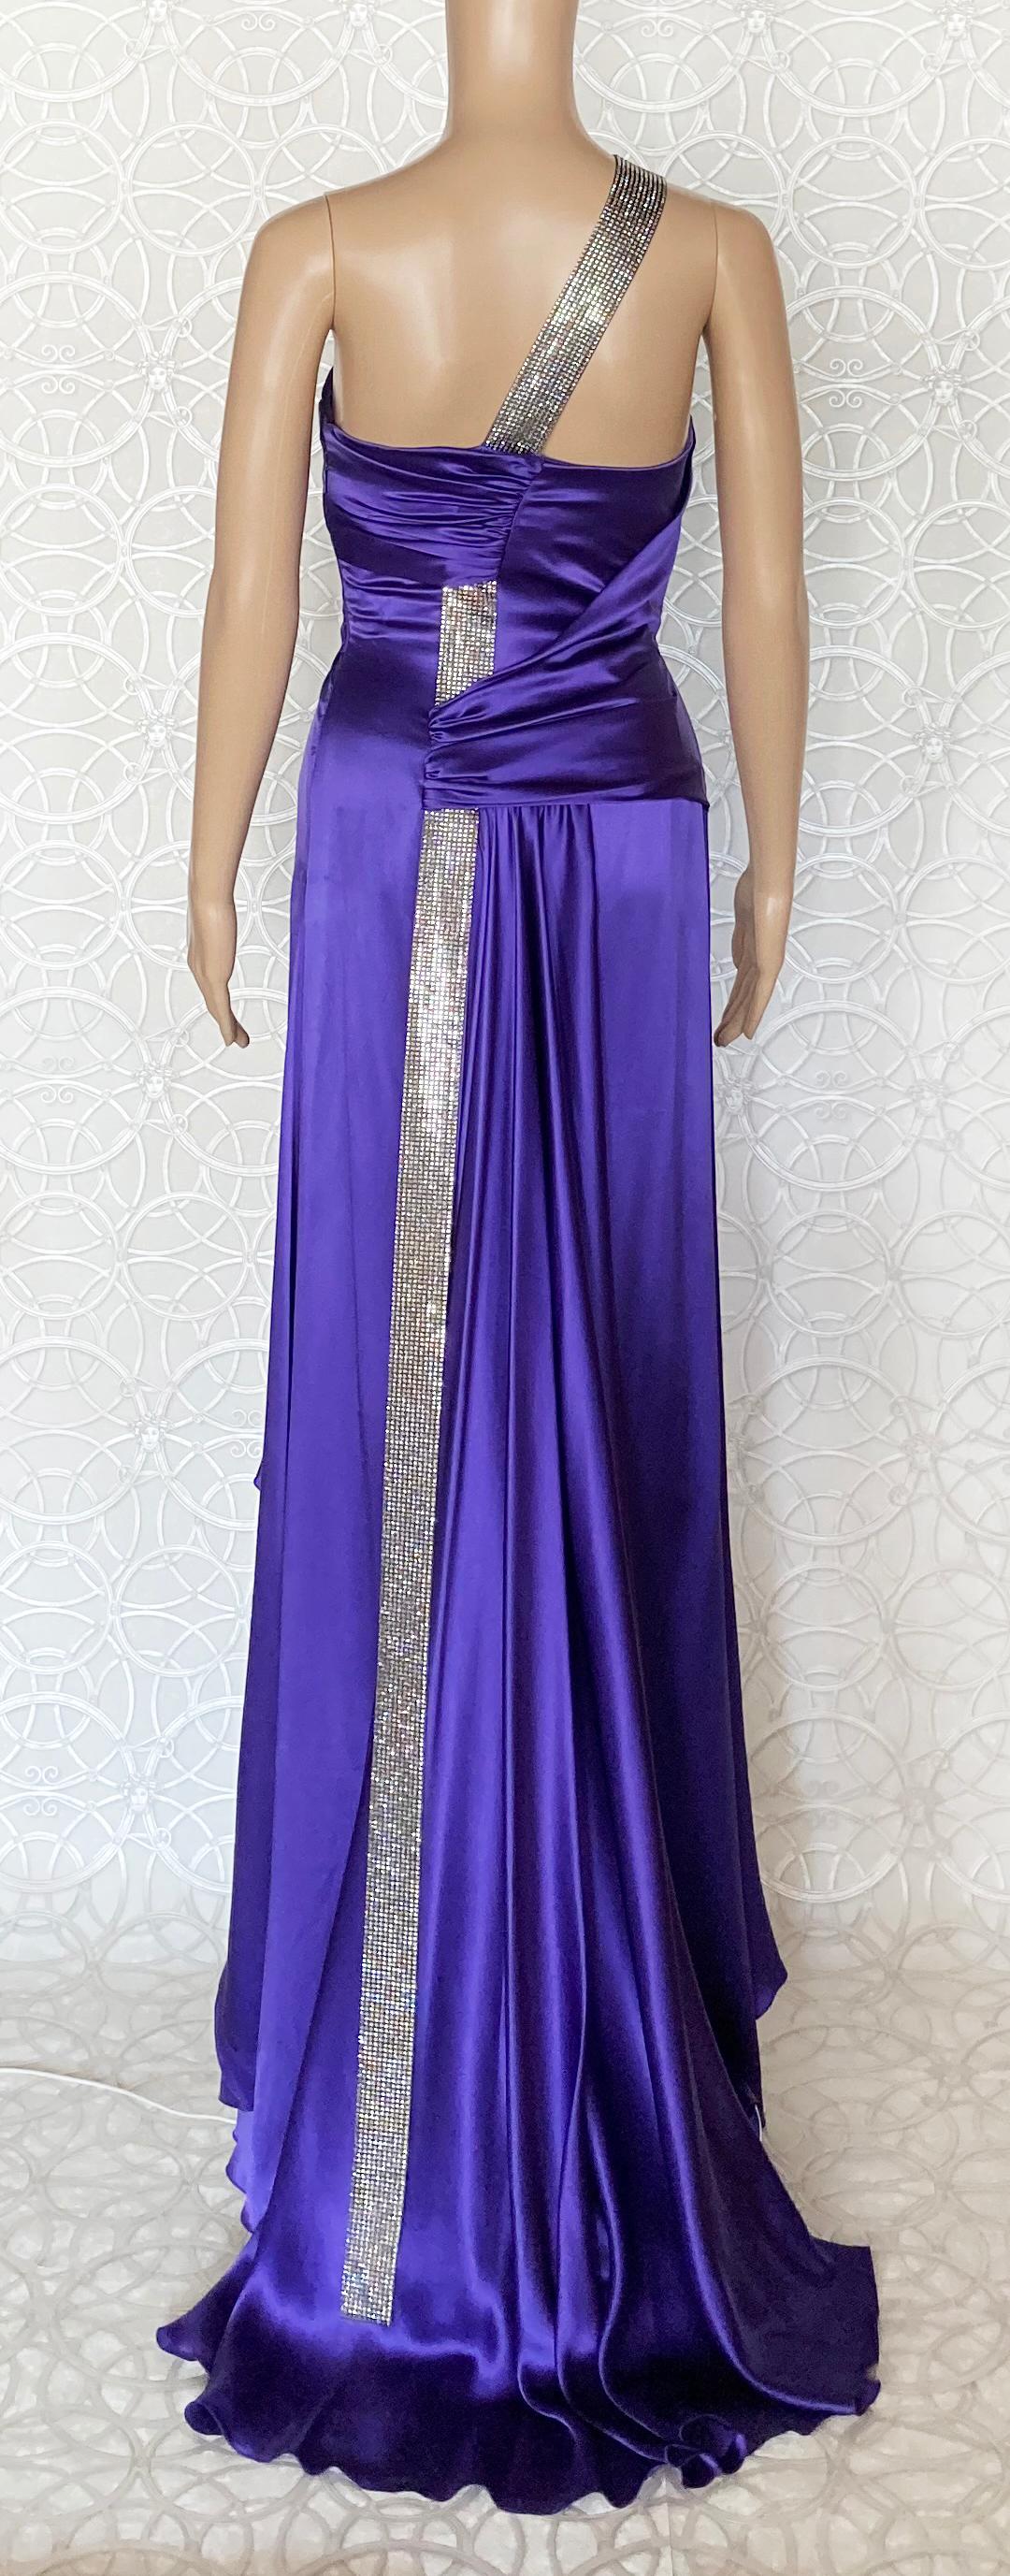 $8, 935 NEW VERSACE PURPLE CRYSTAL EMBELLISHED LONG 100% SILK DRESS Gown 38 - 2 For Sale 3